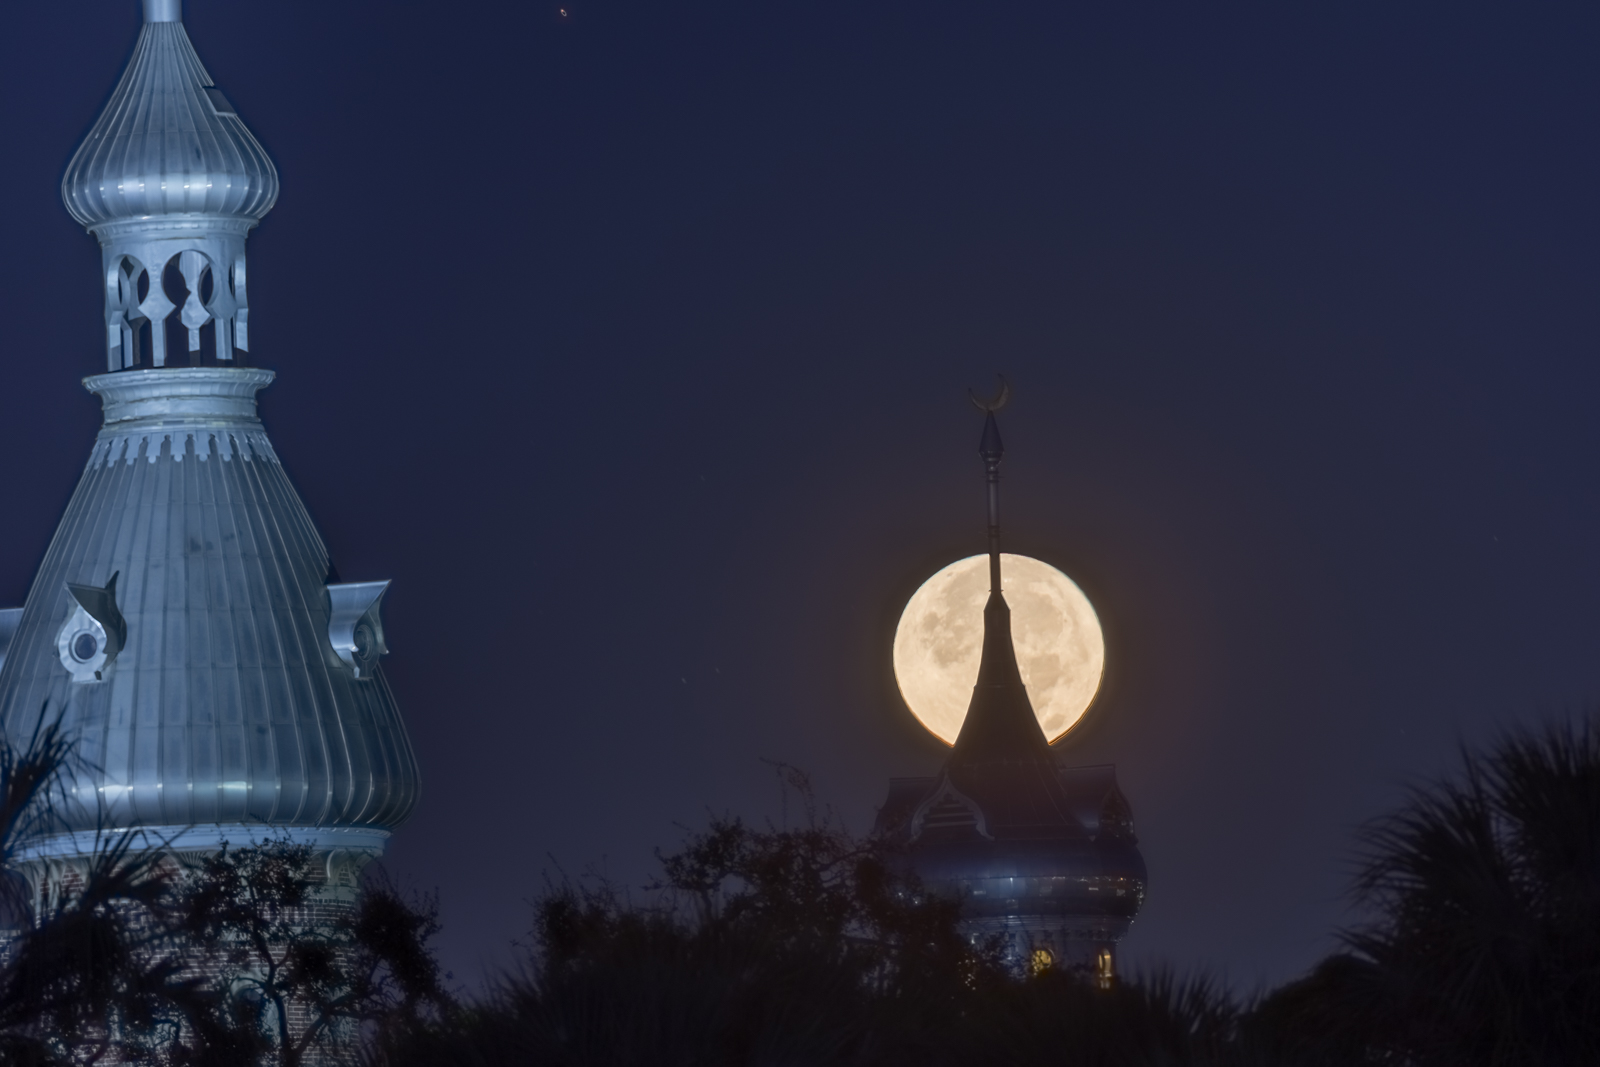 Supermoon over University of Tampa, Tampa, Florida